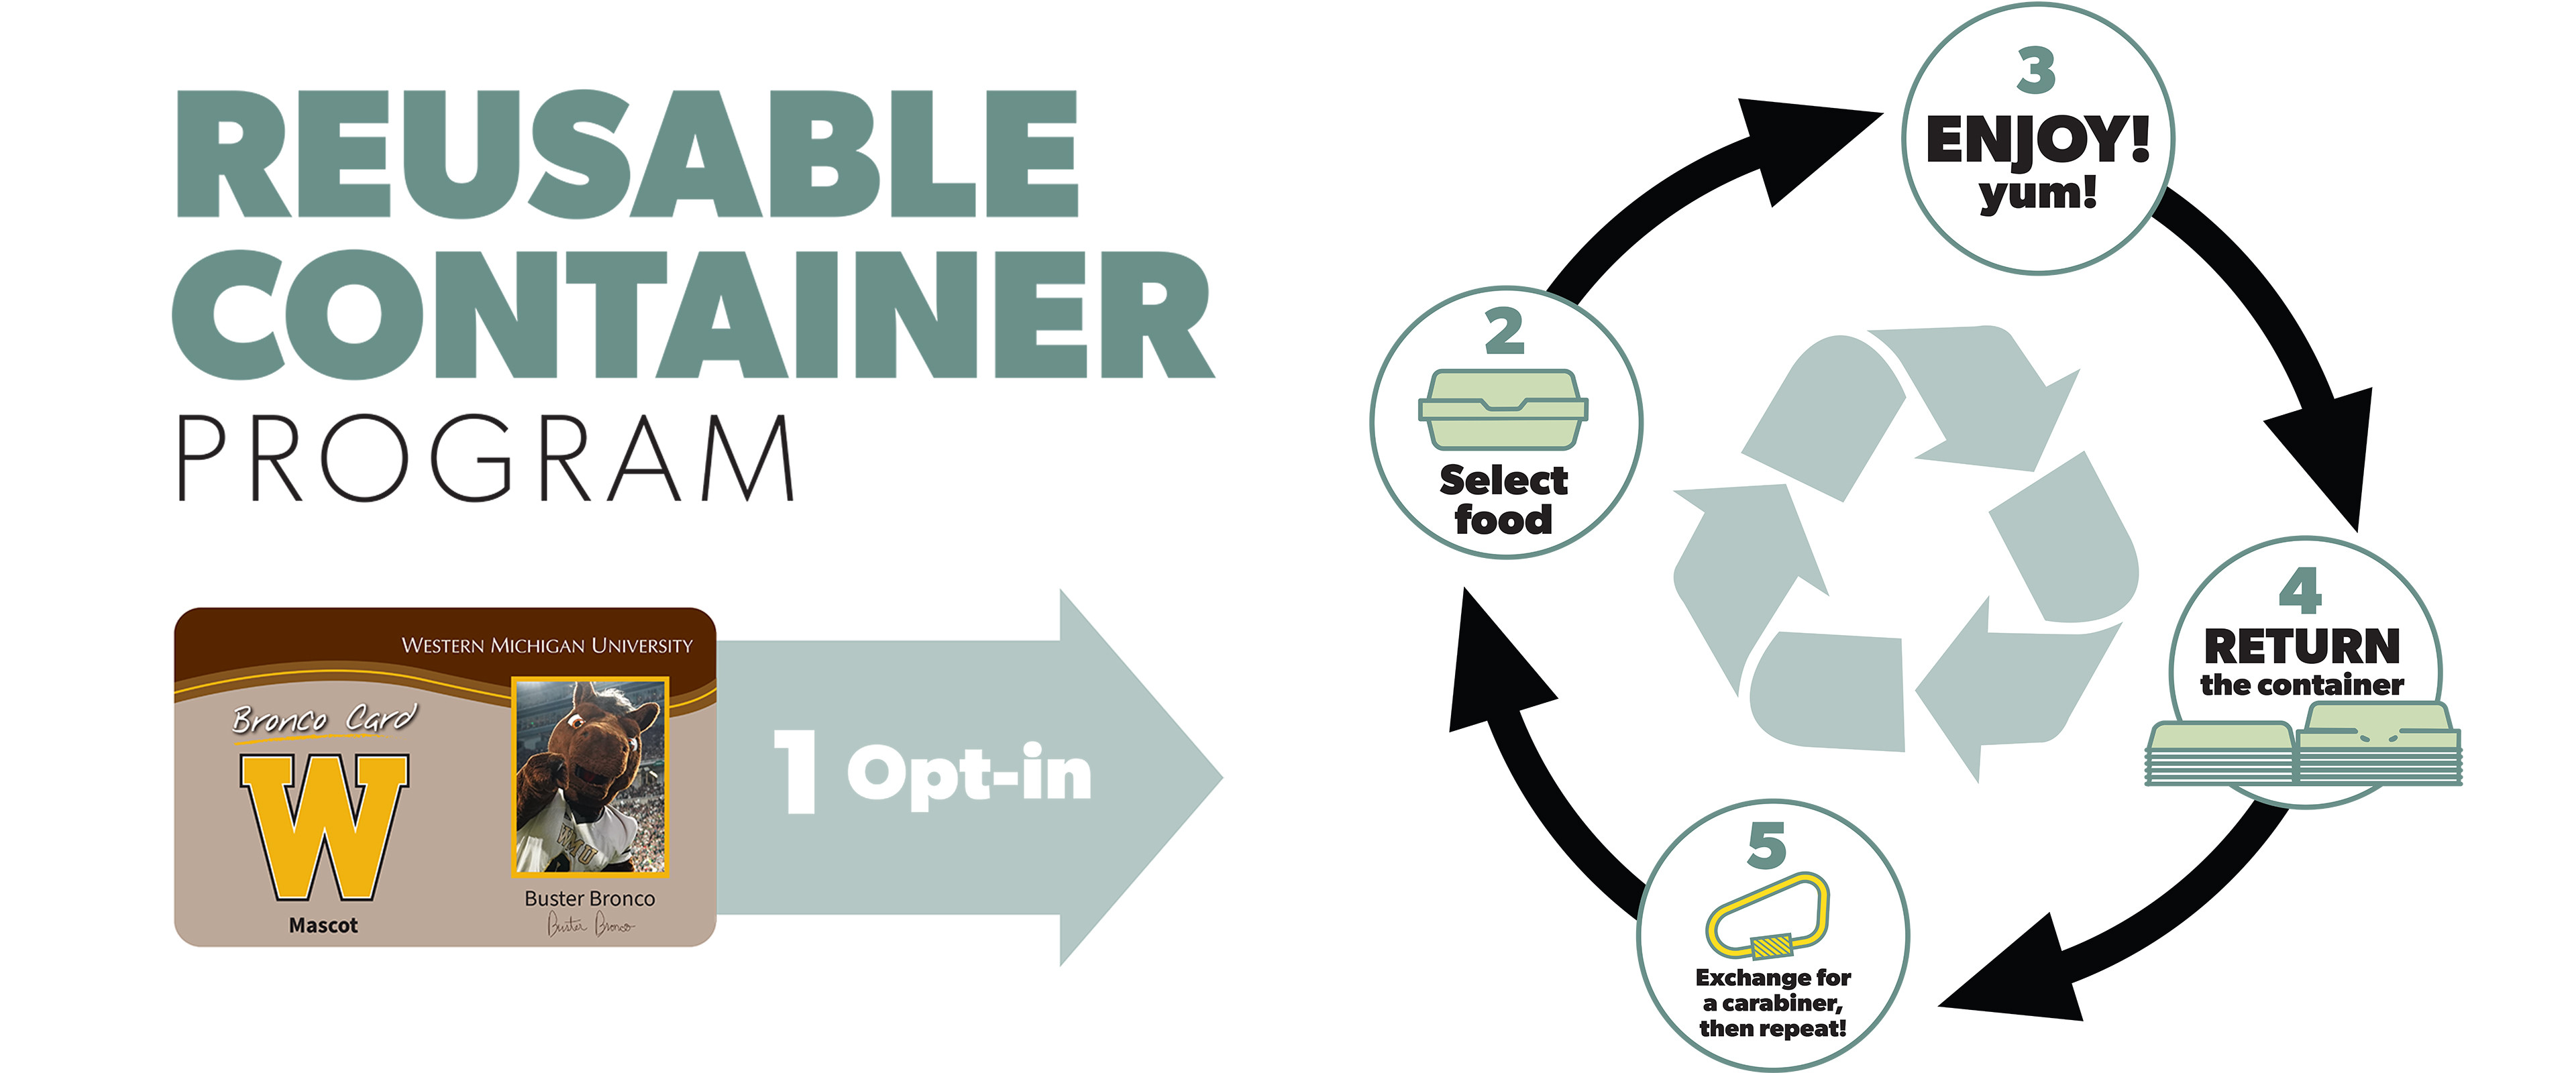 Reusable container graphic showing steps to receive a container 1: Opt-in 2: Select Food 3: Enjoy! 4: Return the container 5: Exchange for a carabiner